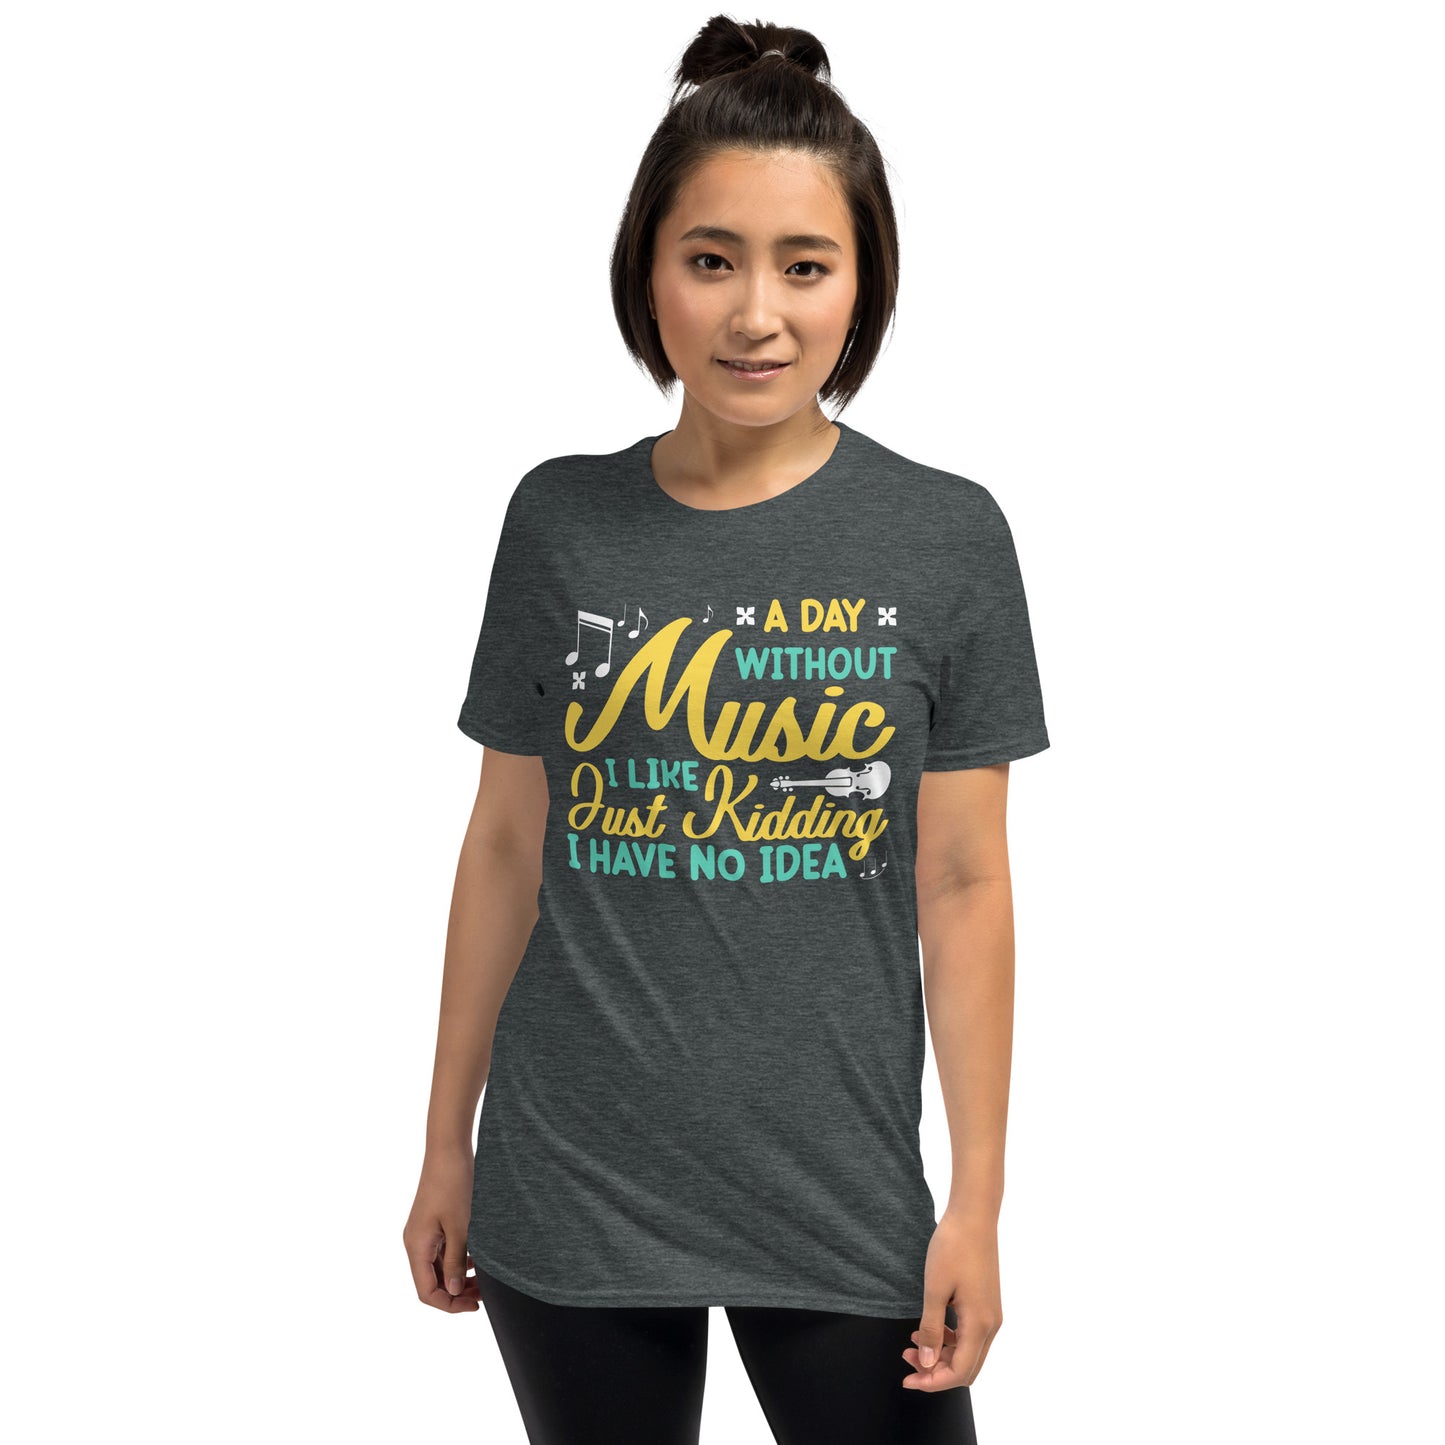 A Day Without Music, I Like, Just Kidding, I Have No Idea Shirt